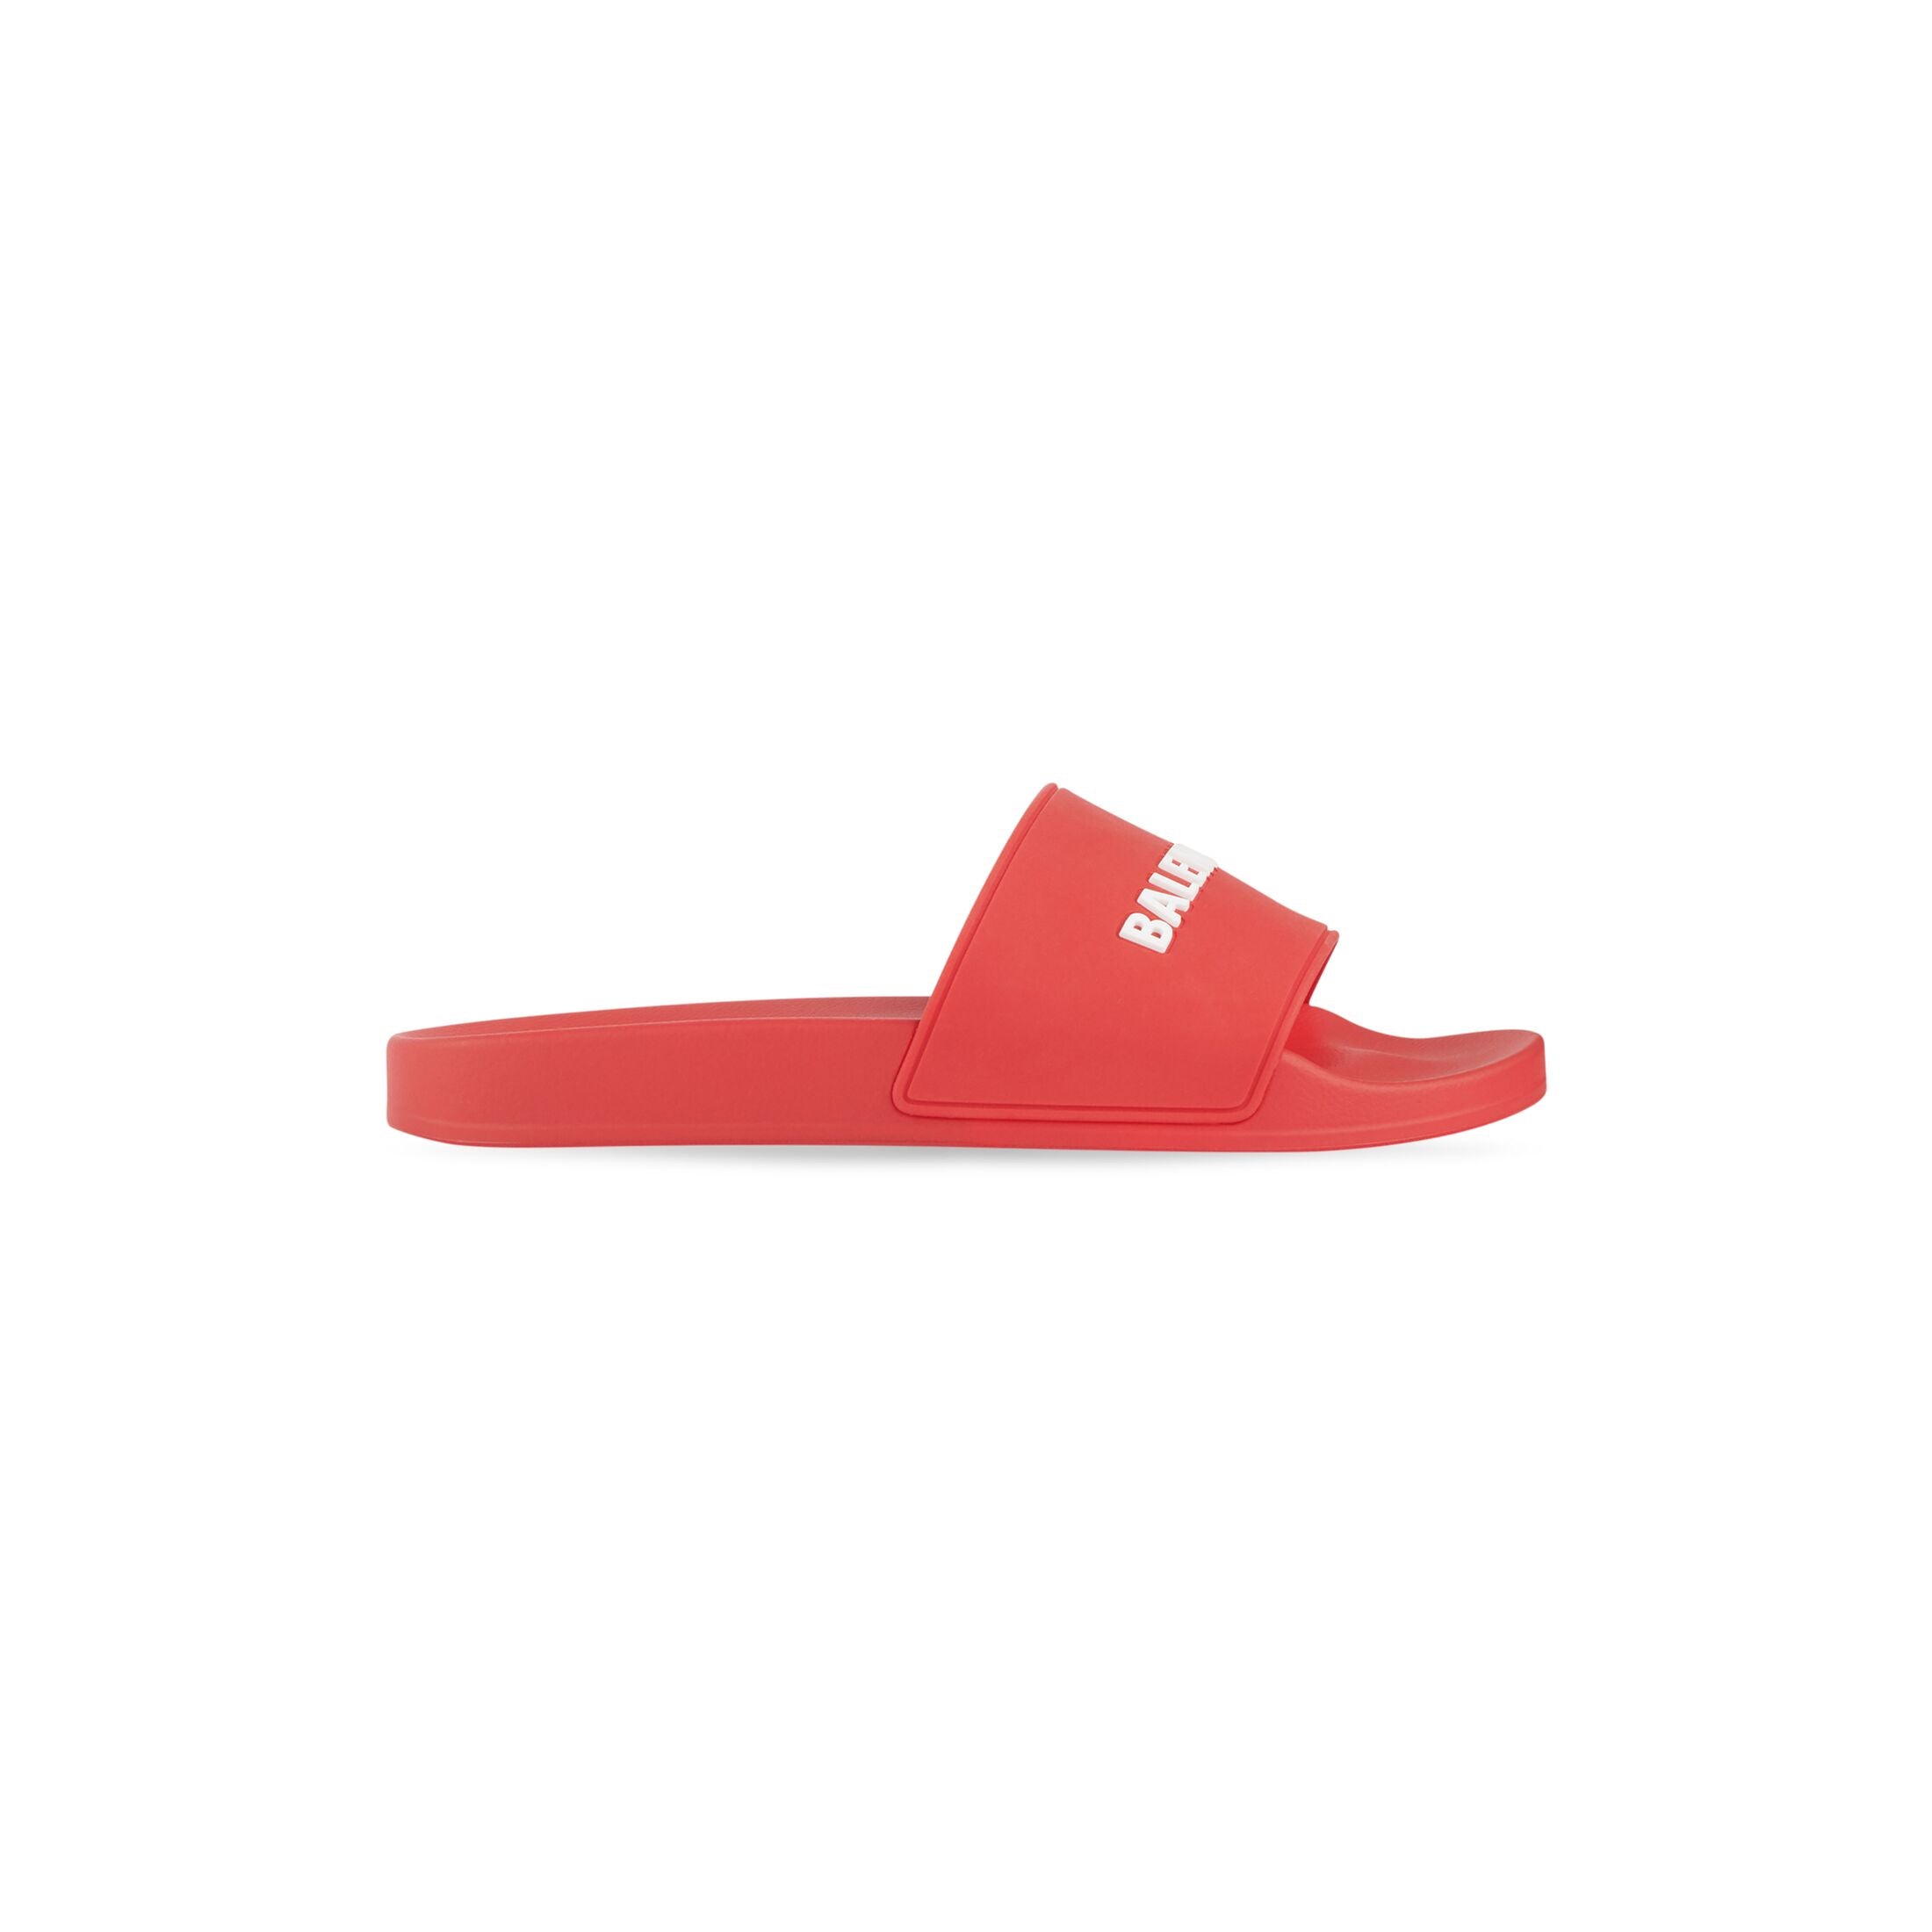 Balenciaga Pool Slide Sandal In Red Smooth Rubber